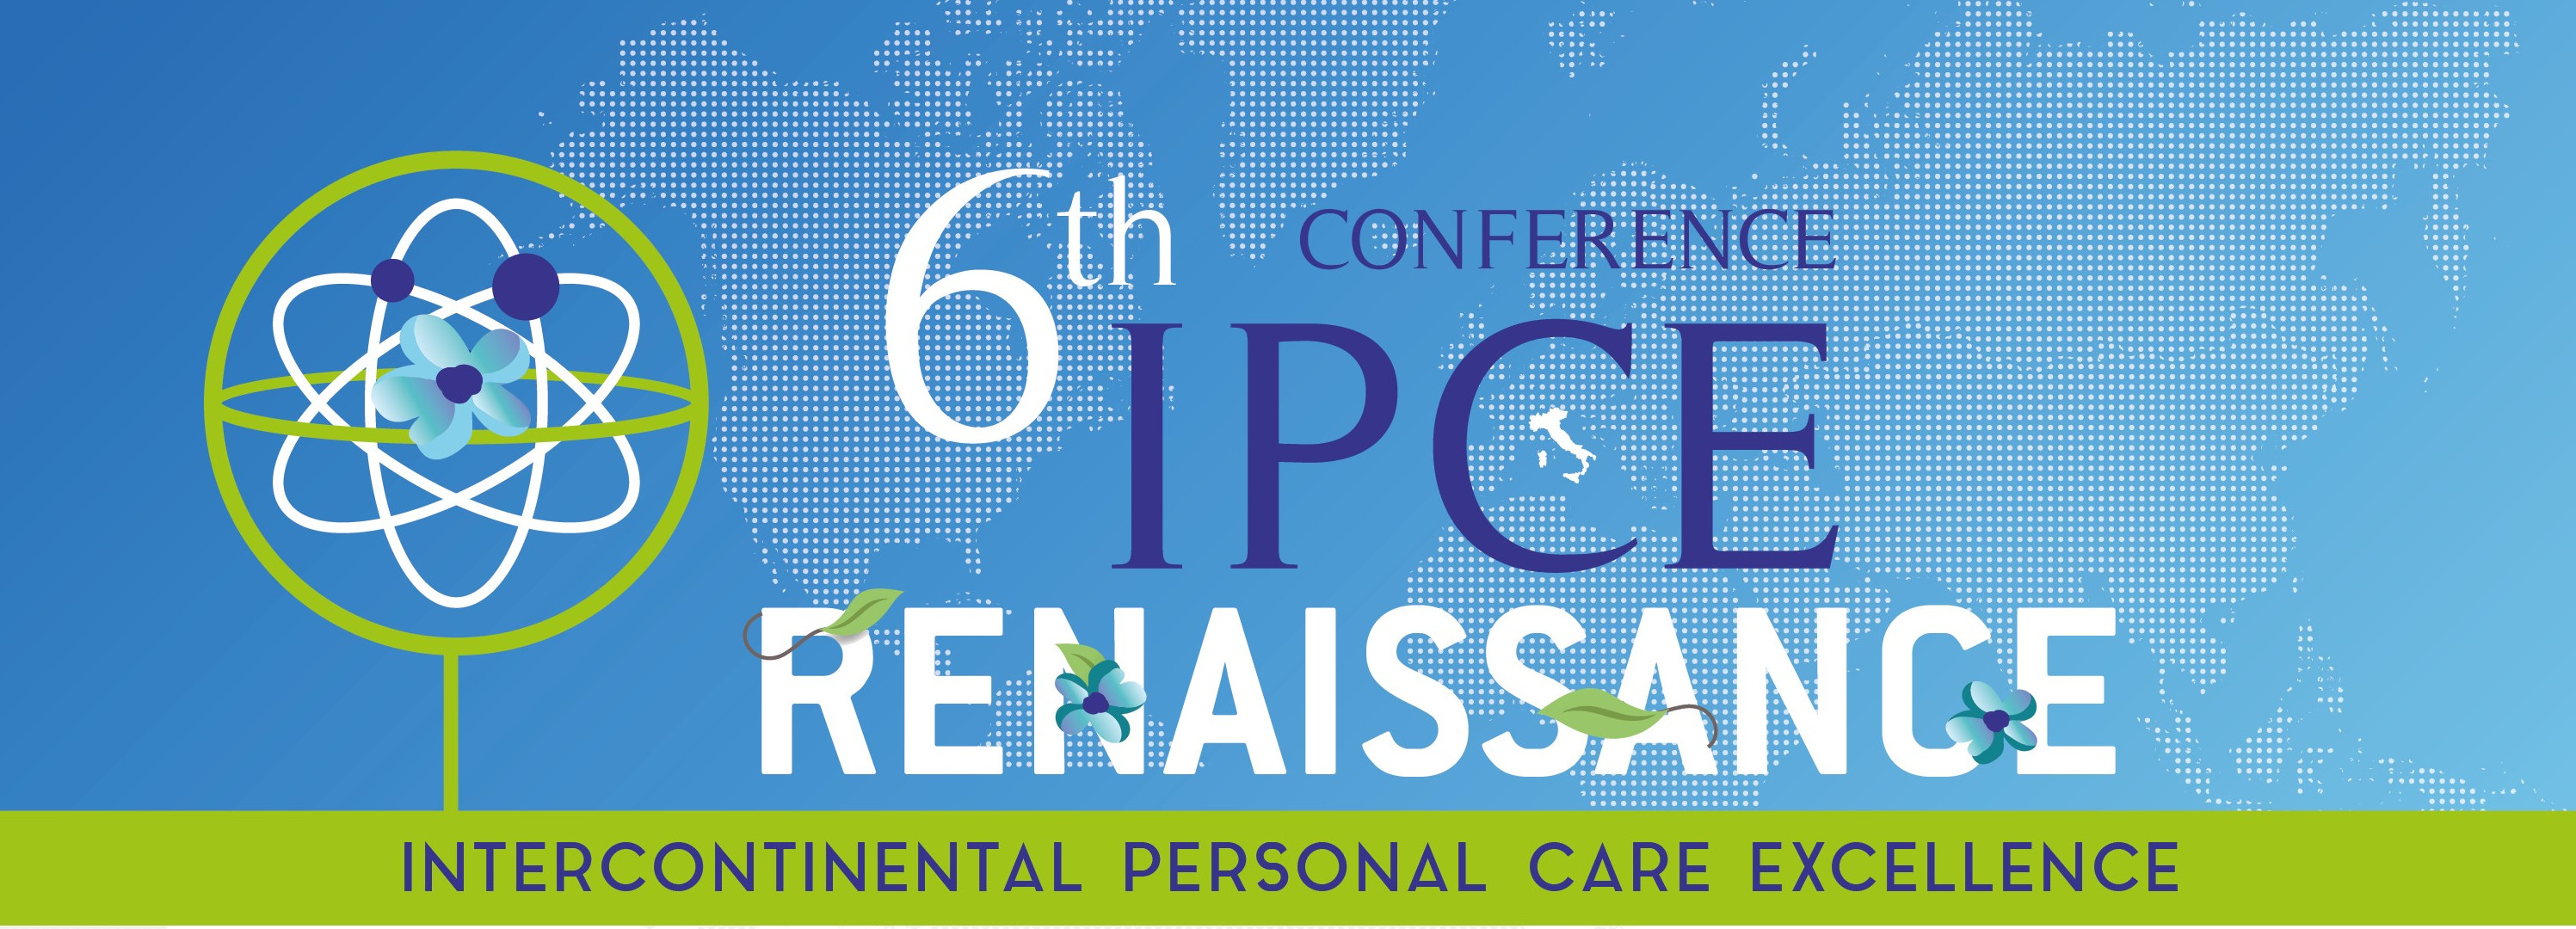 5th IPCE Conference